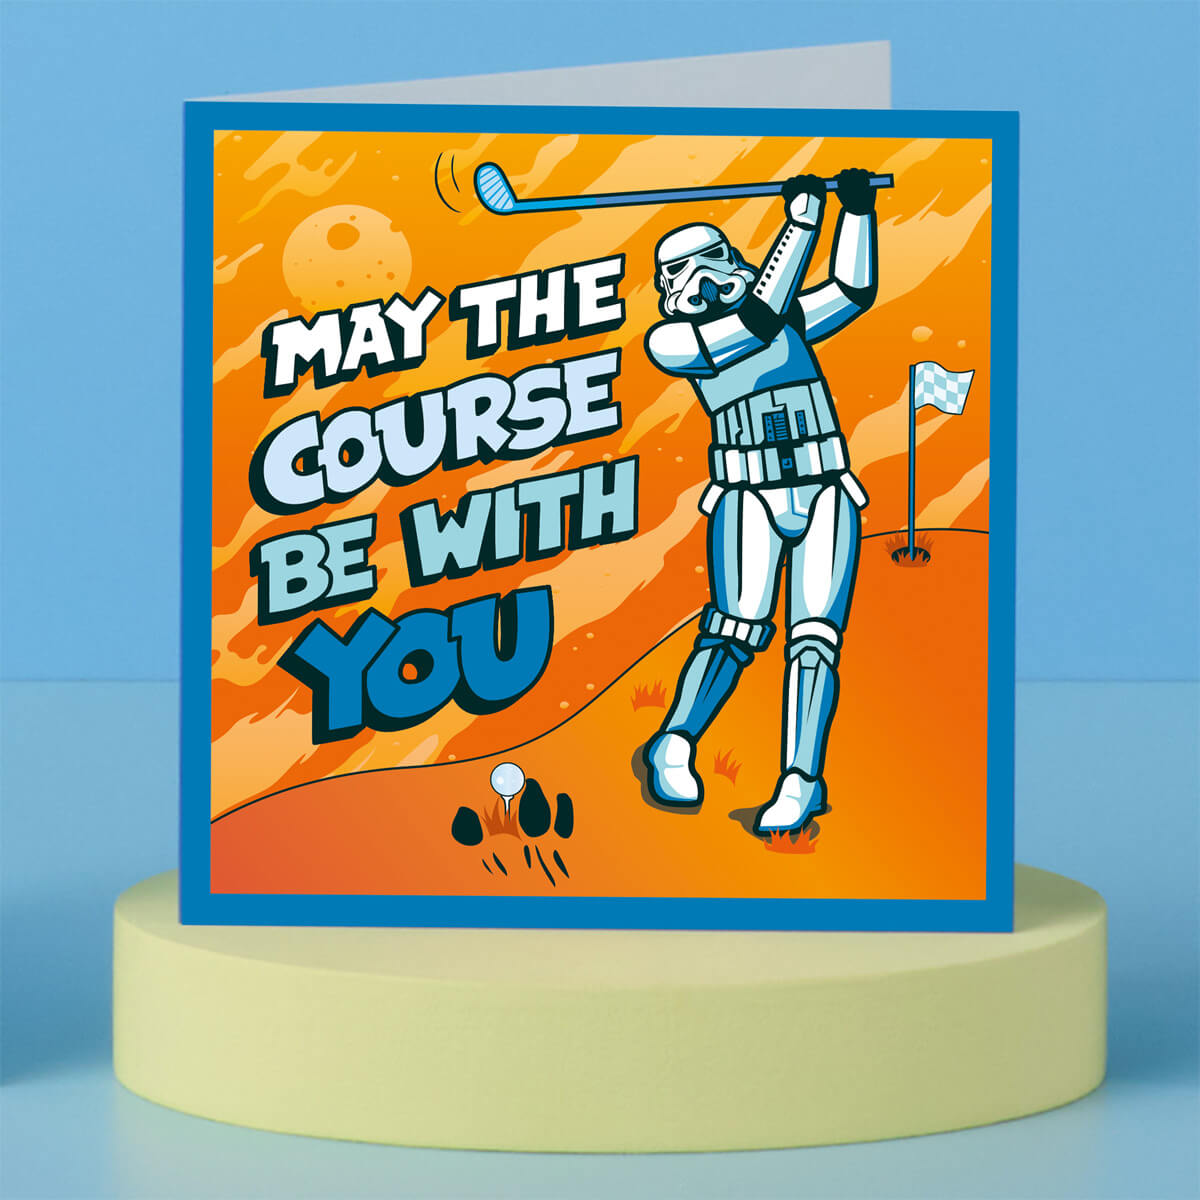 Original Stormtrooper Golf Greeting Card by Cardology - officially licensed